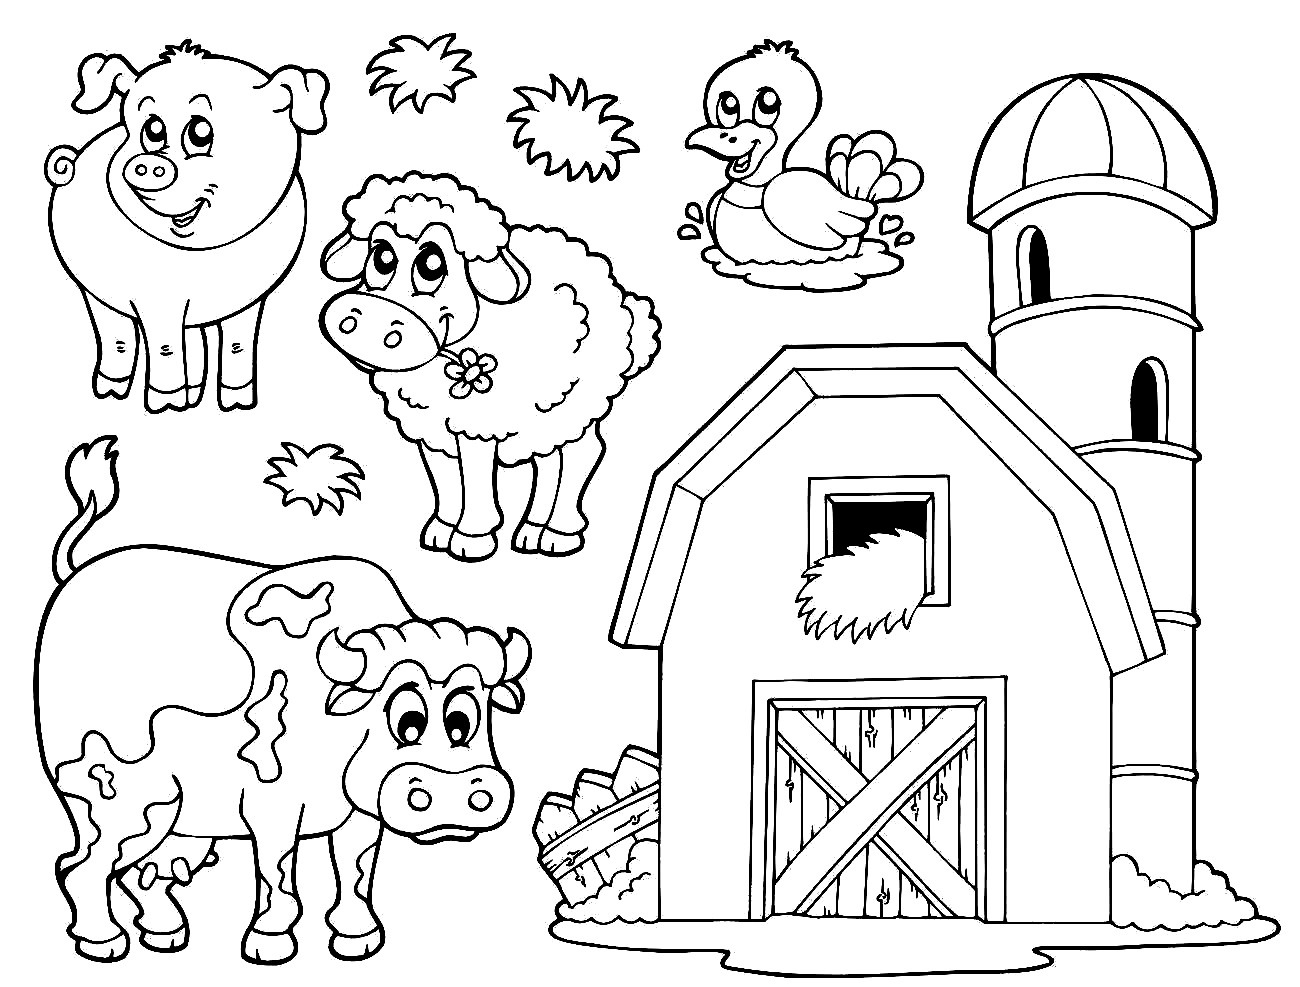 Coloring Pages Of Farm Animals For Preschoolers at GetColorings.com